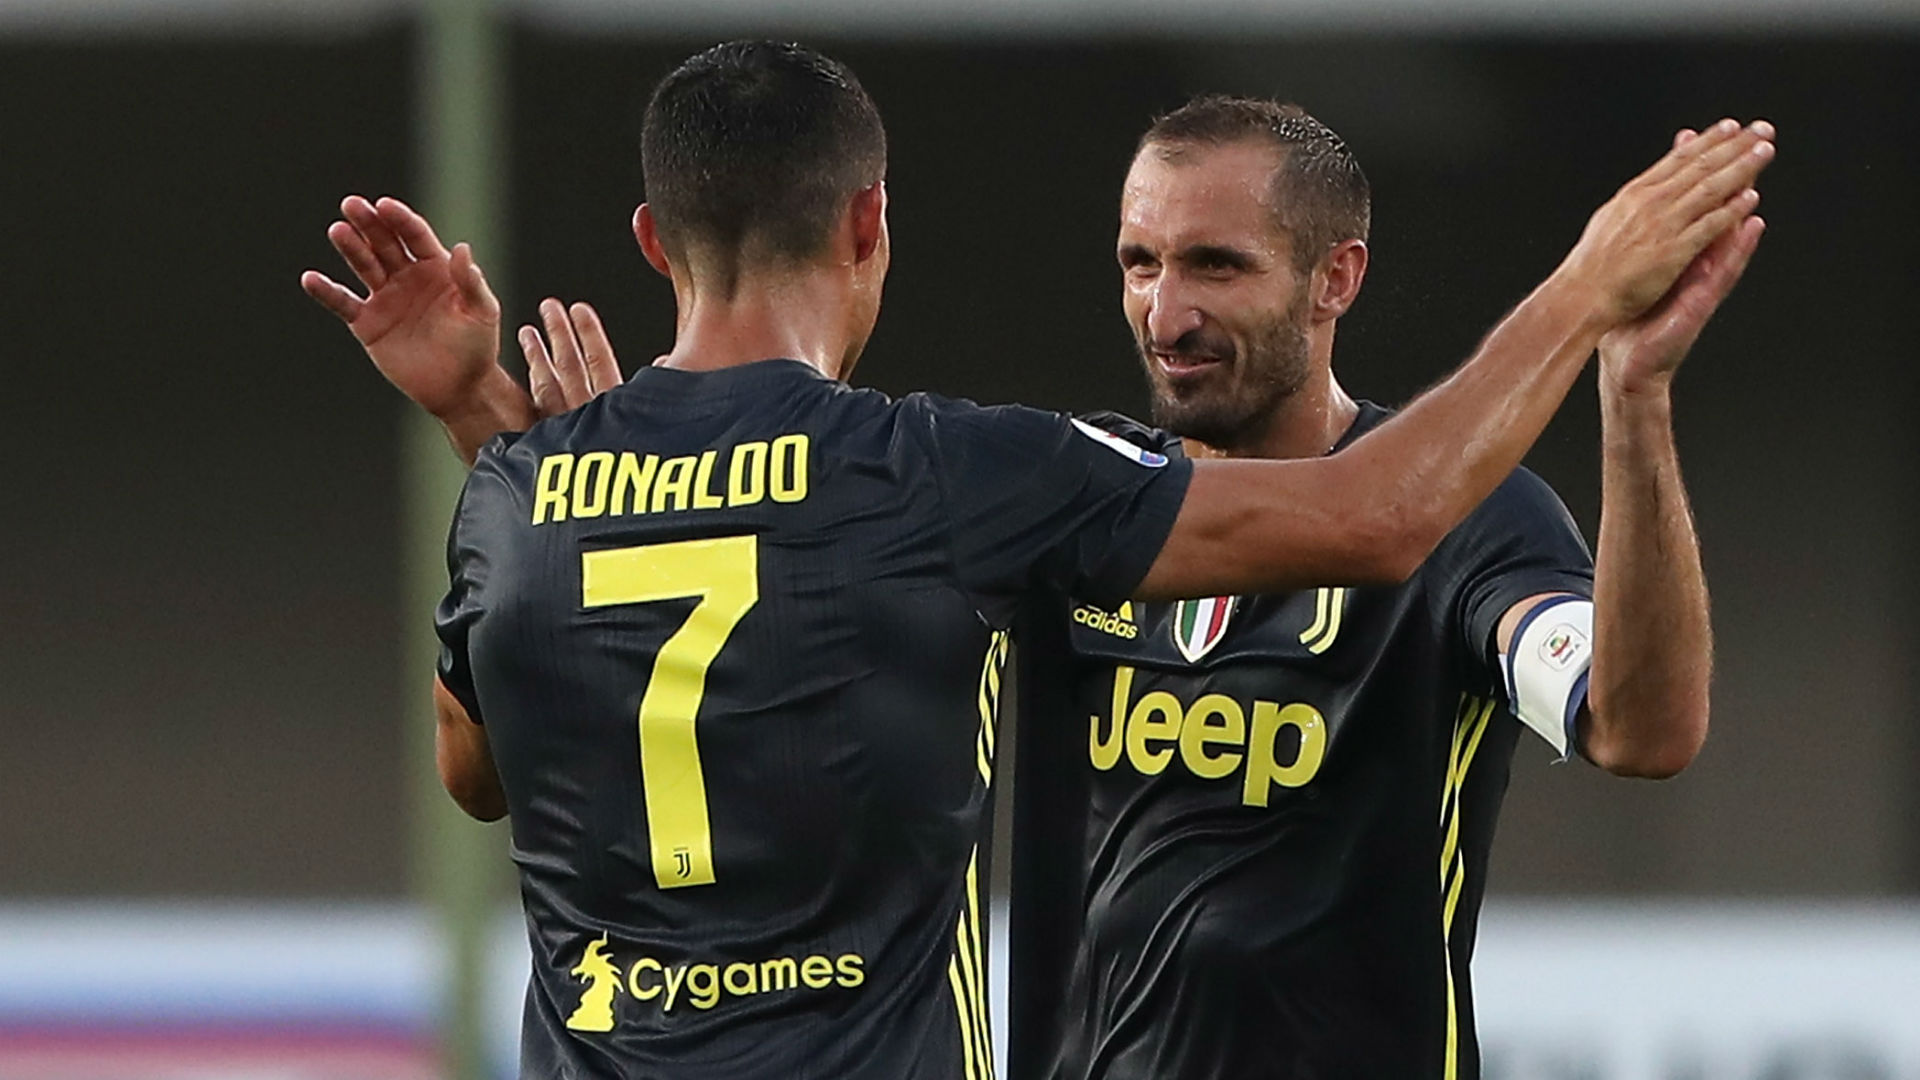 Cristiano Ronaldo has helped fill the void left by Gianluigi Buffon's departure from Juventus, according to Giorgio Chiellini.